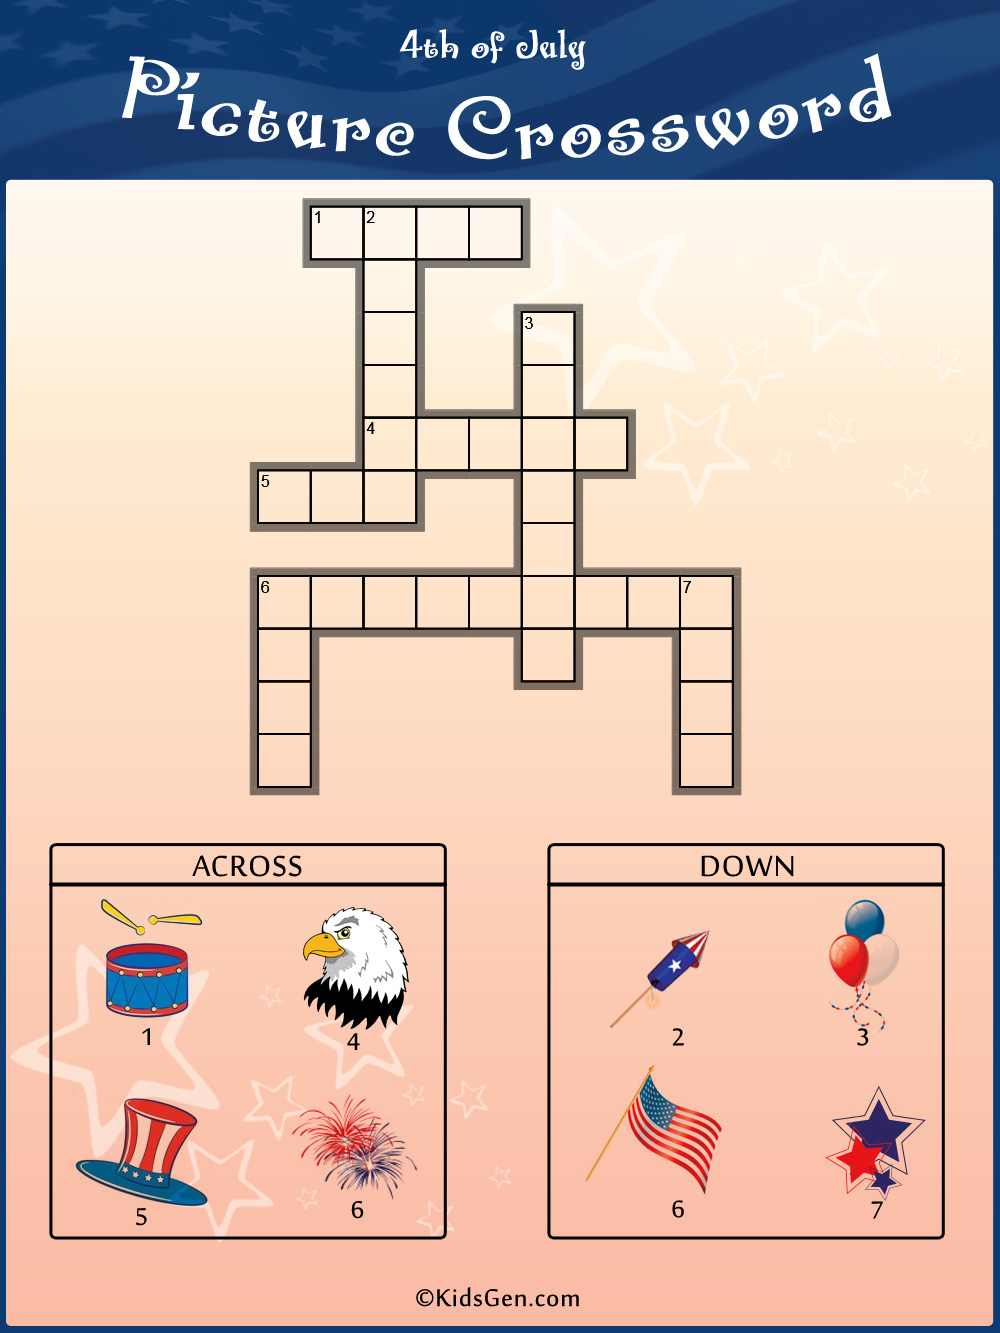 Color Anagram Puzzle with pictures